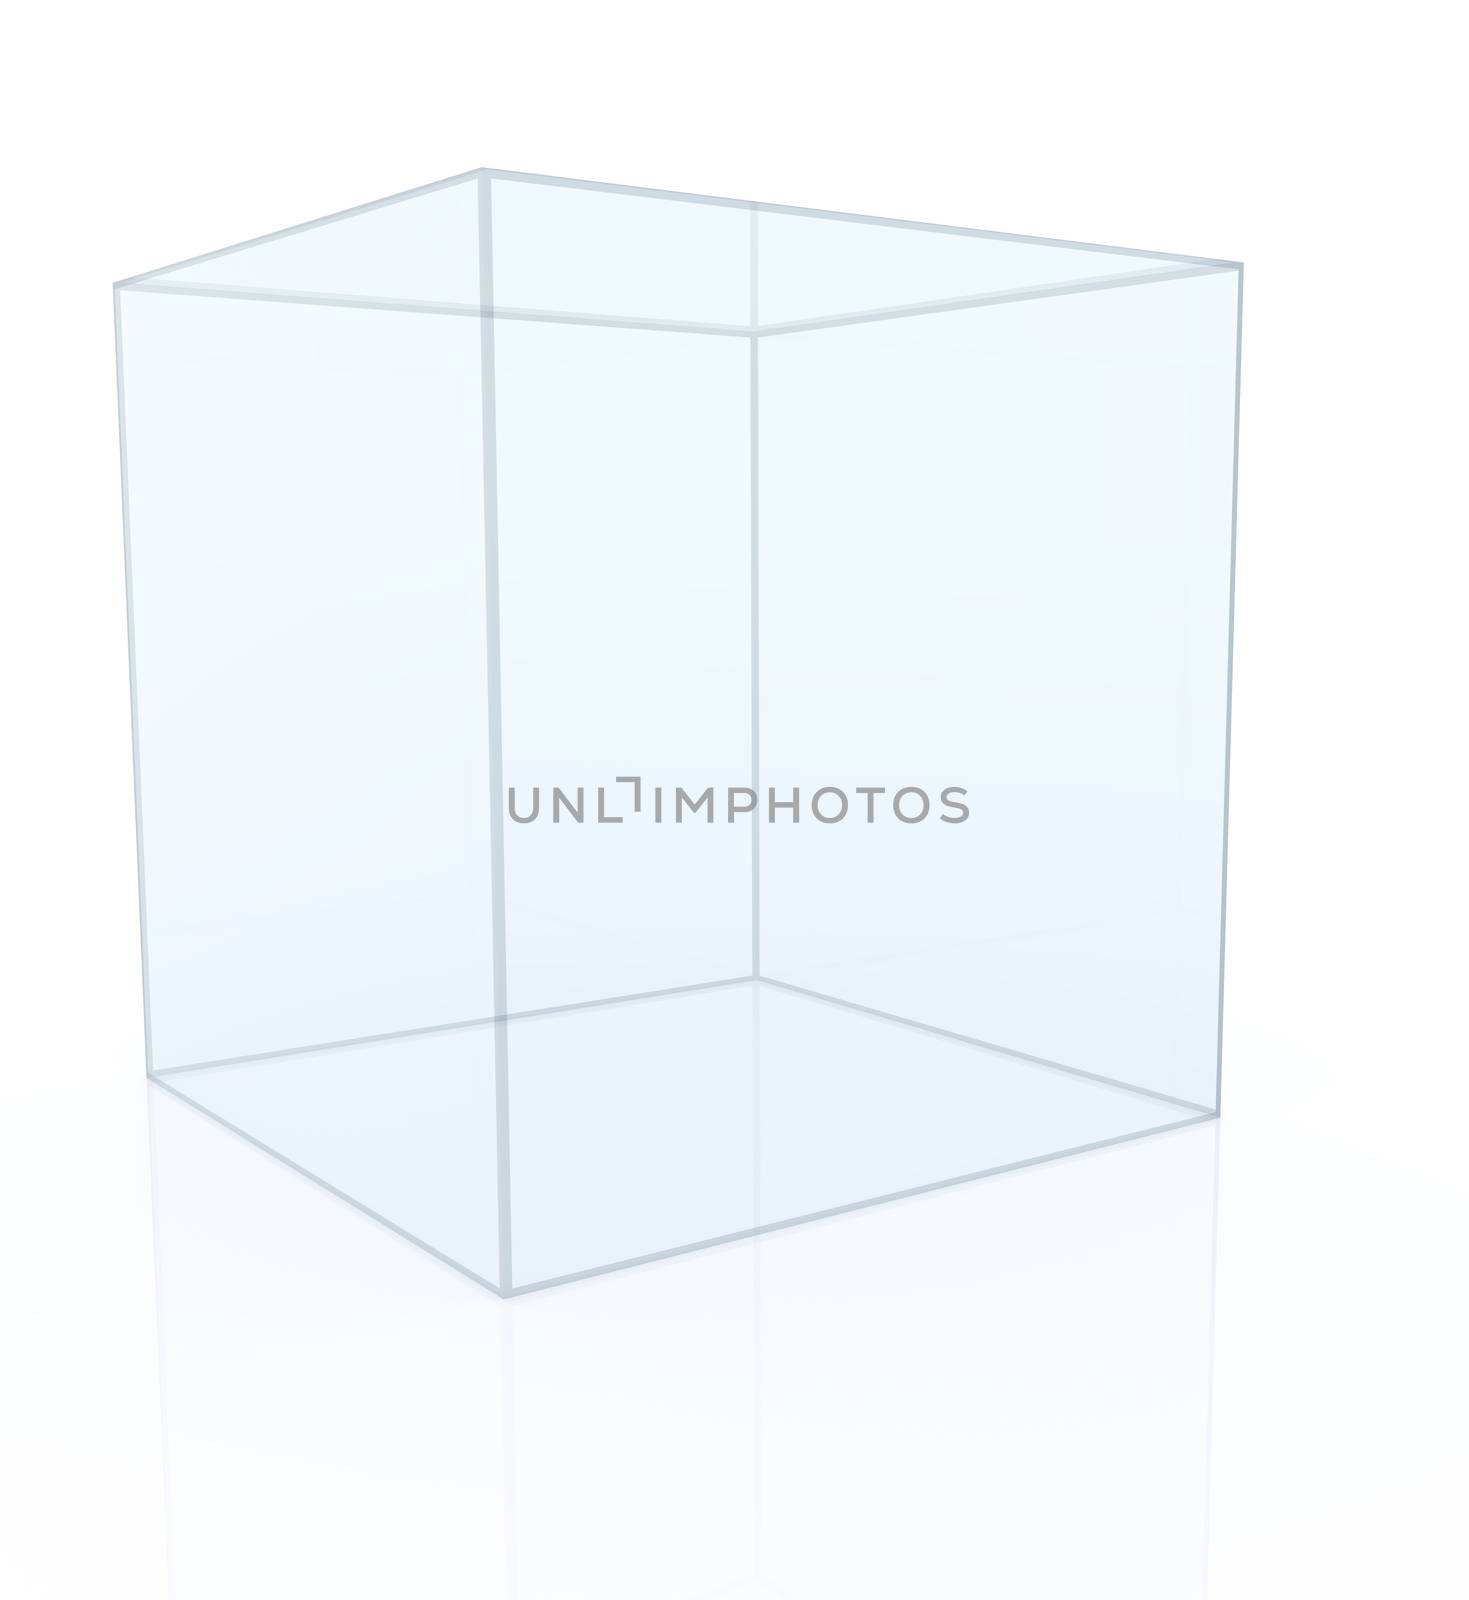 Glass cube. Showcase for project presentation. Isolated on white background. 3D illustration